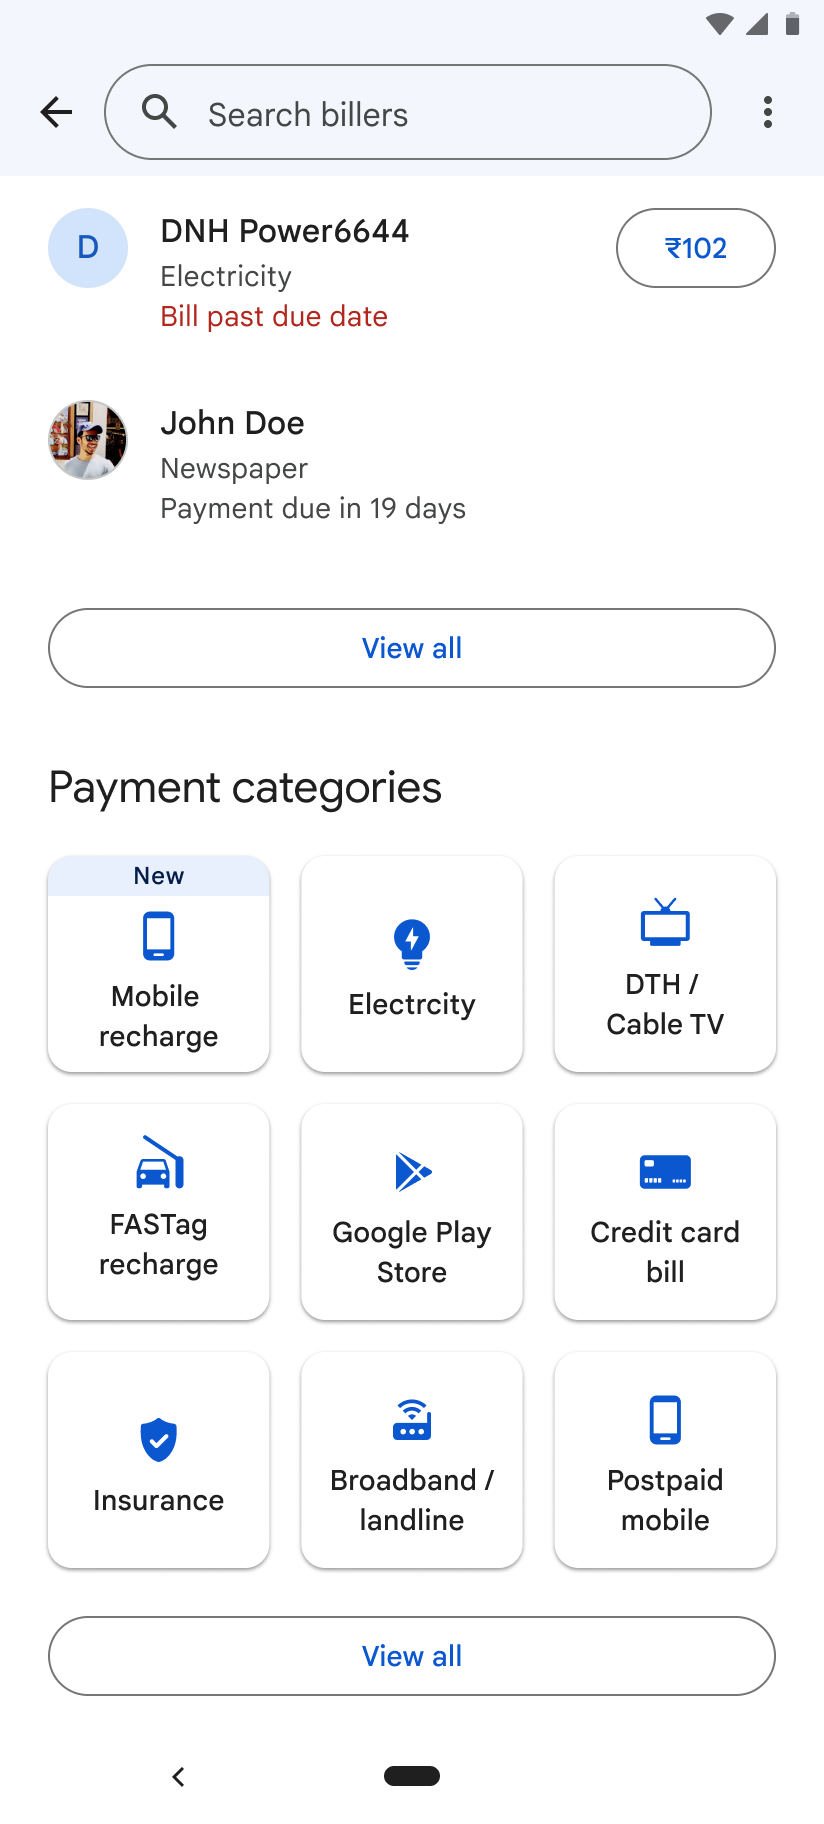 Payment categories